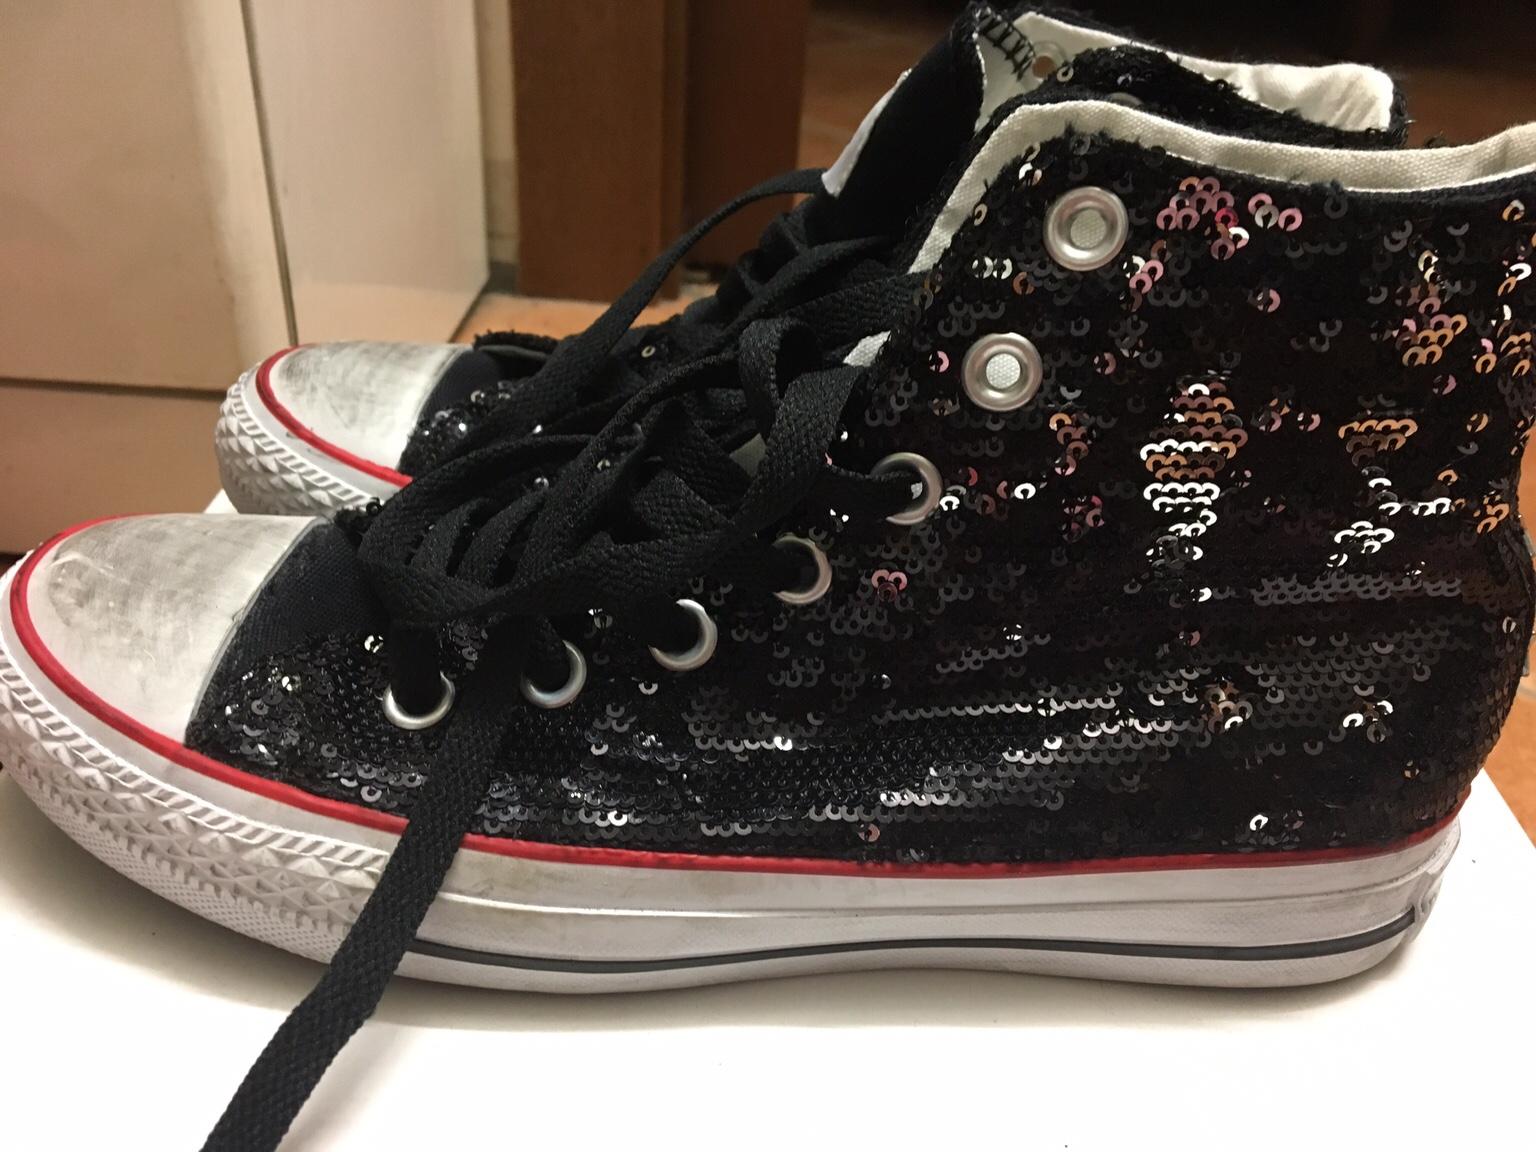 CONVERSE PRIMADONNA CON PAIETTE N.38 in 20026 Bollate for €20.00 for sale |  Shpock